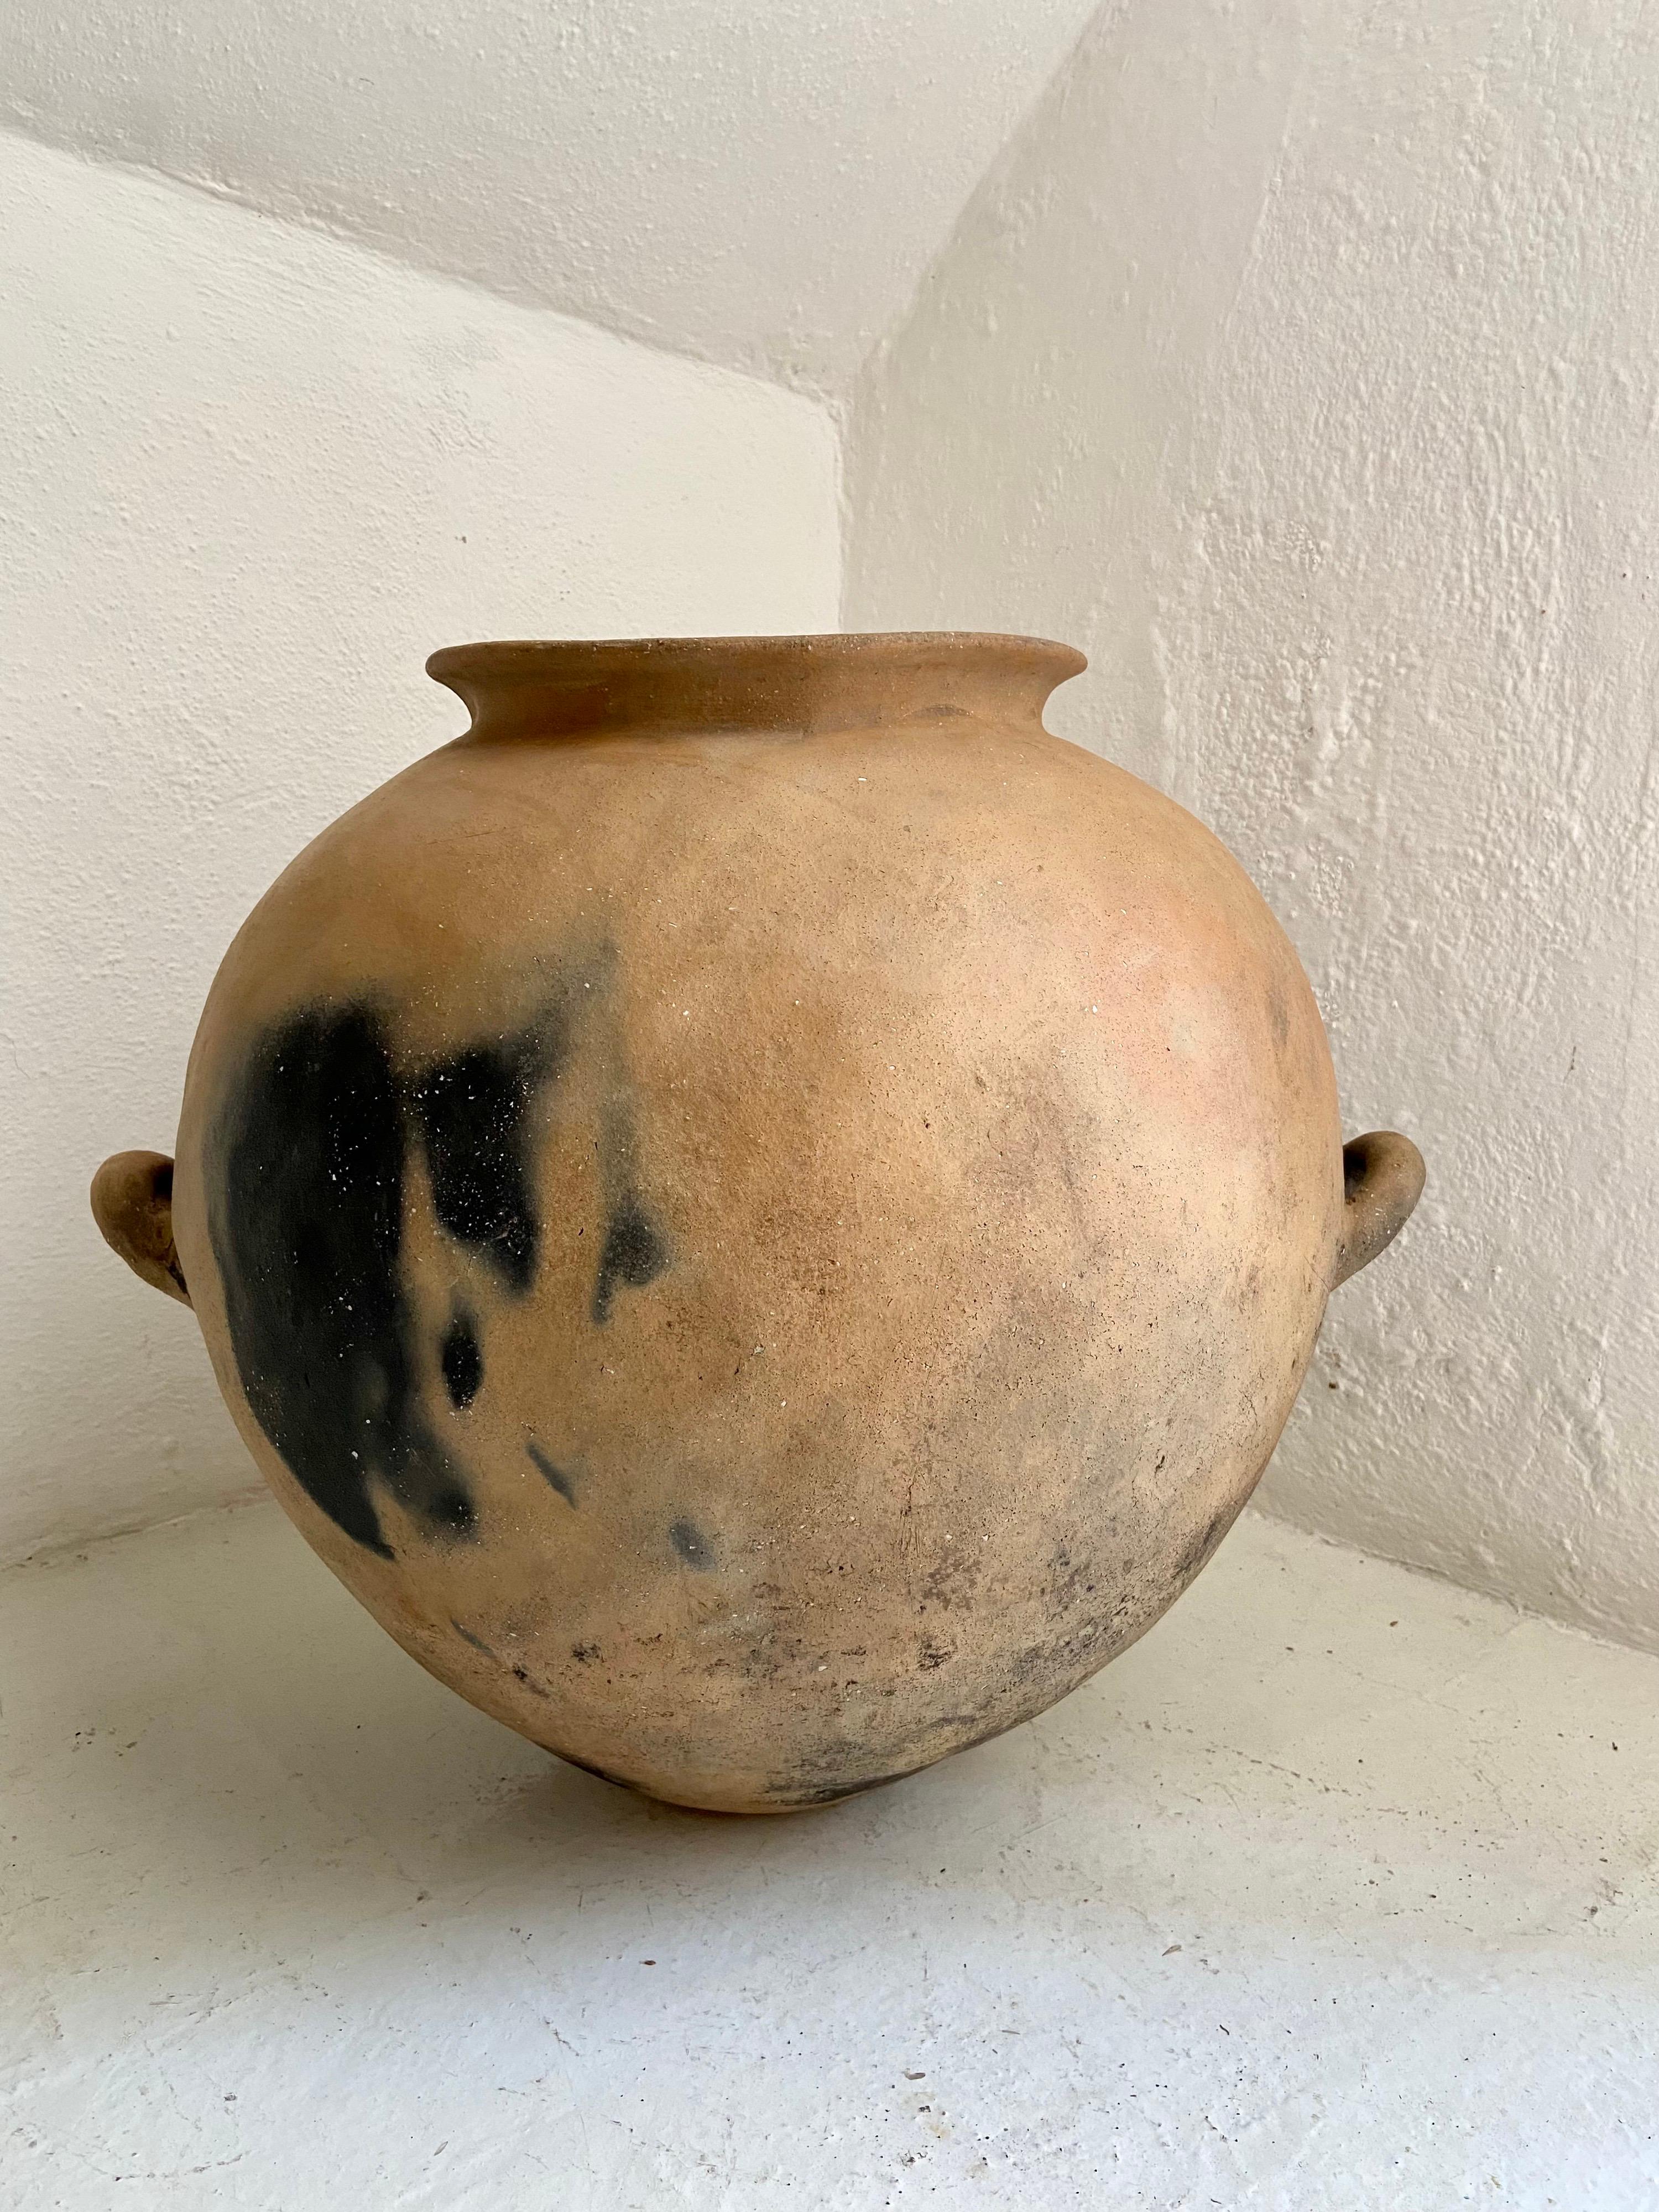 Terracotta pot with handles from Mexico, Early 20th century. Hand-coiled by the Nahua indigenous people of the Northwestern region of Puebla. This style of pottery was discontinued over 60 years ago.